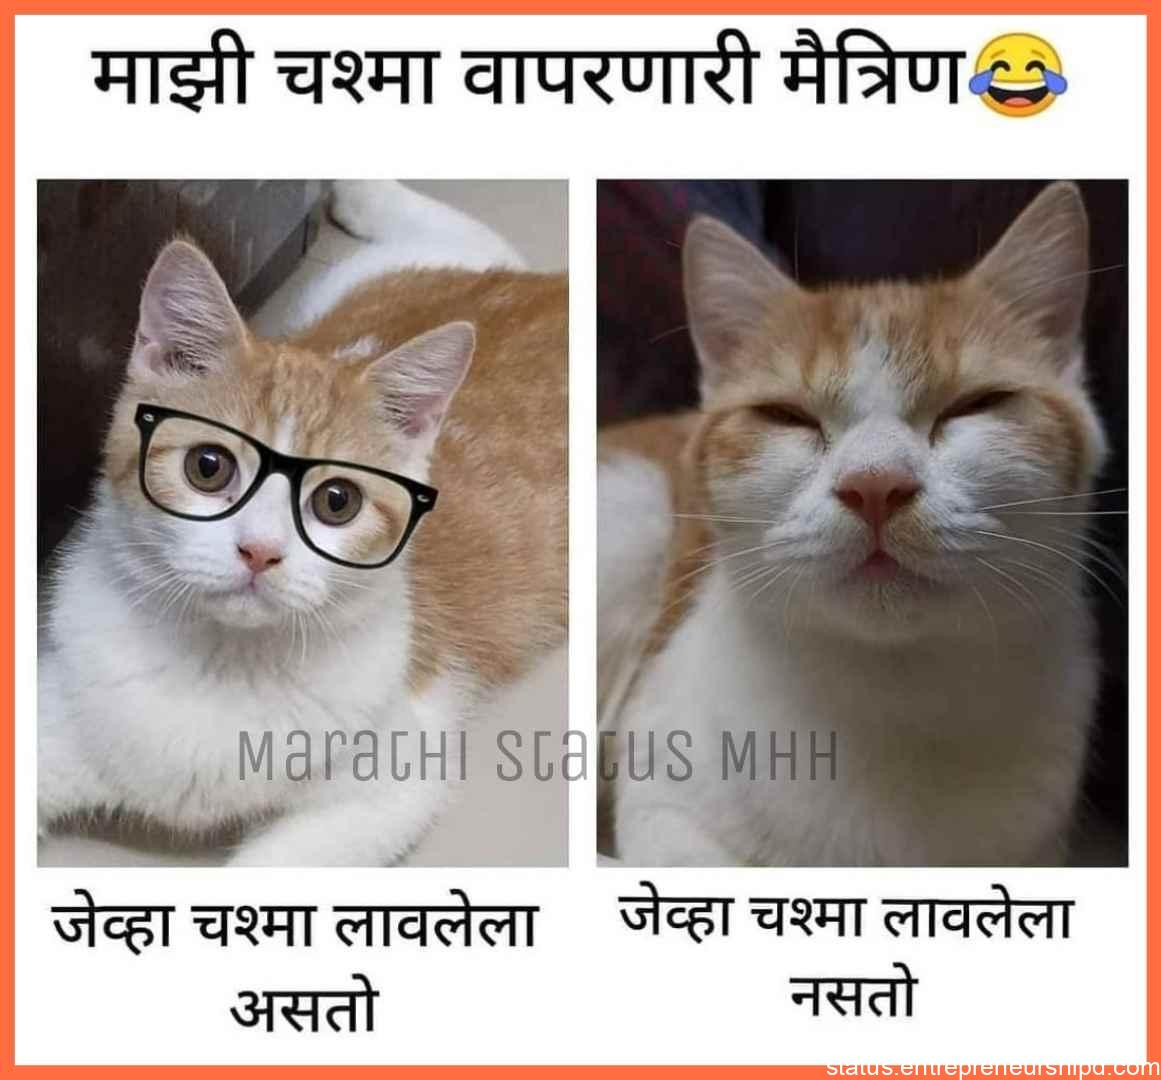 Marathi memes two cat and best'cheshmes friends